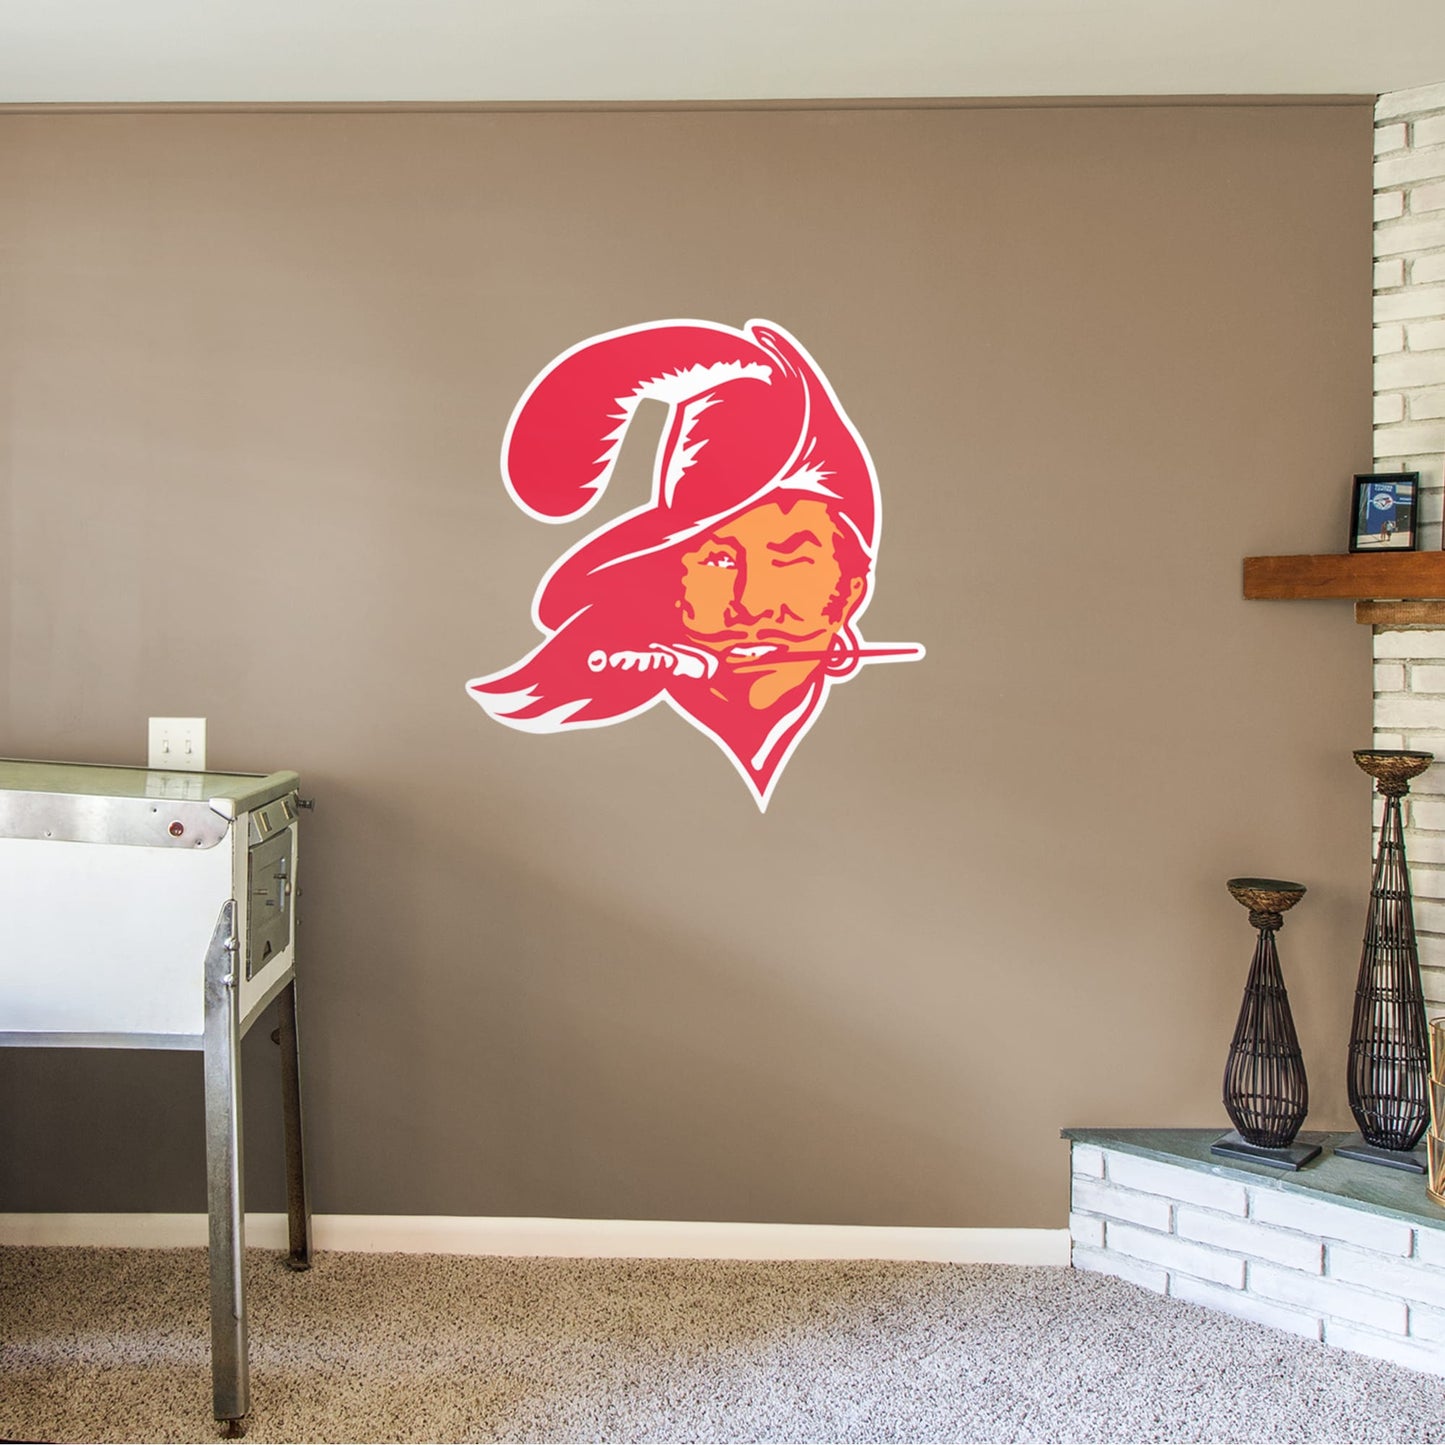 Tampa Bay Buccaneers: Classic Logo - Officially Licensed NFL Removable Wall Decal